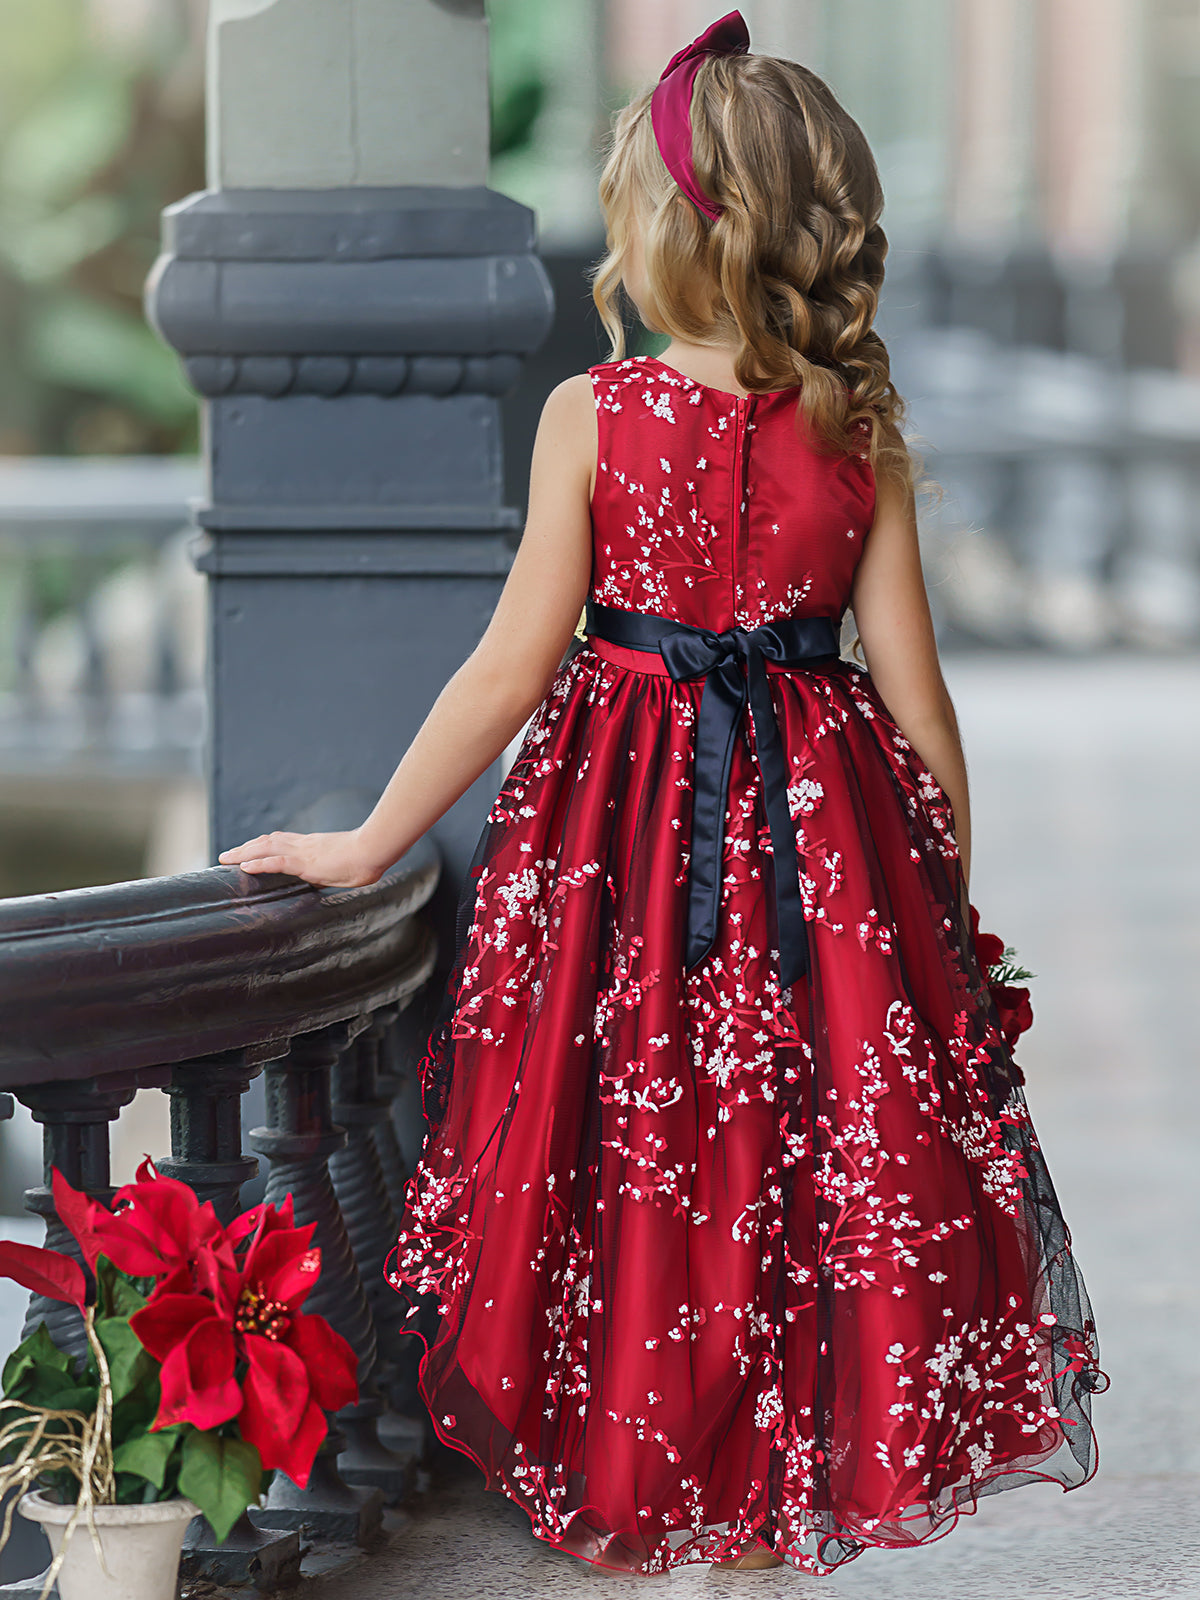 Girls Formal Dresses | Cherry Blossom Embroidered Hi-Lo Party Dress